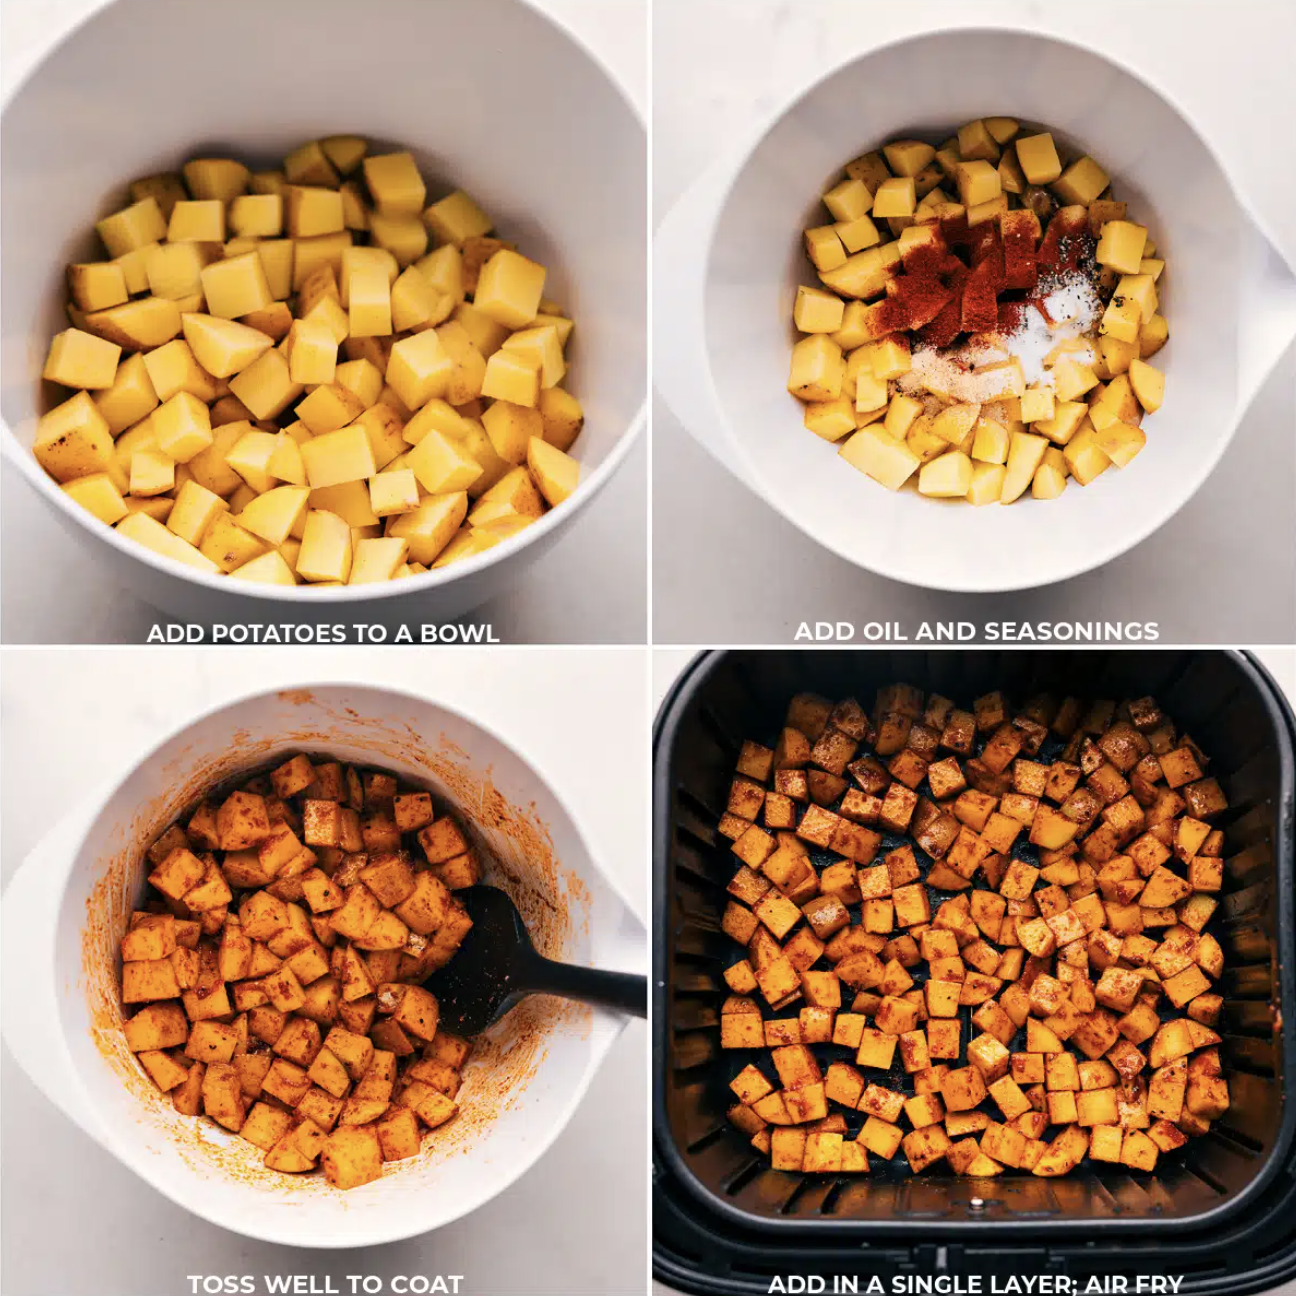 Four-step image showing cubed potatoes in a bowl, adding seasoning, tossing, and spread in an air fryer